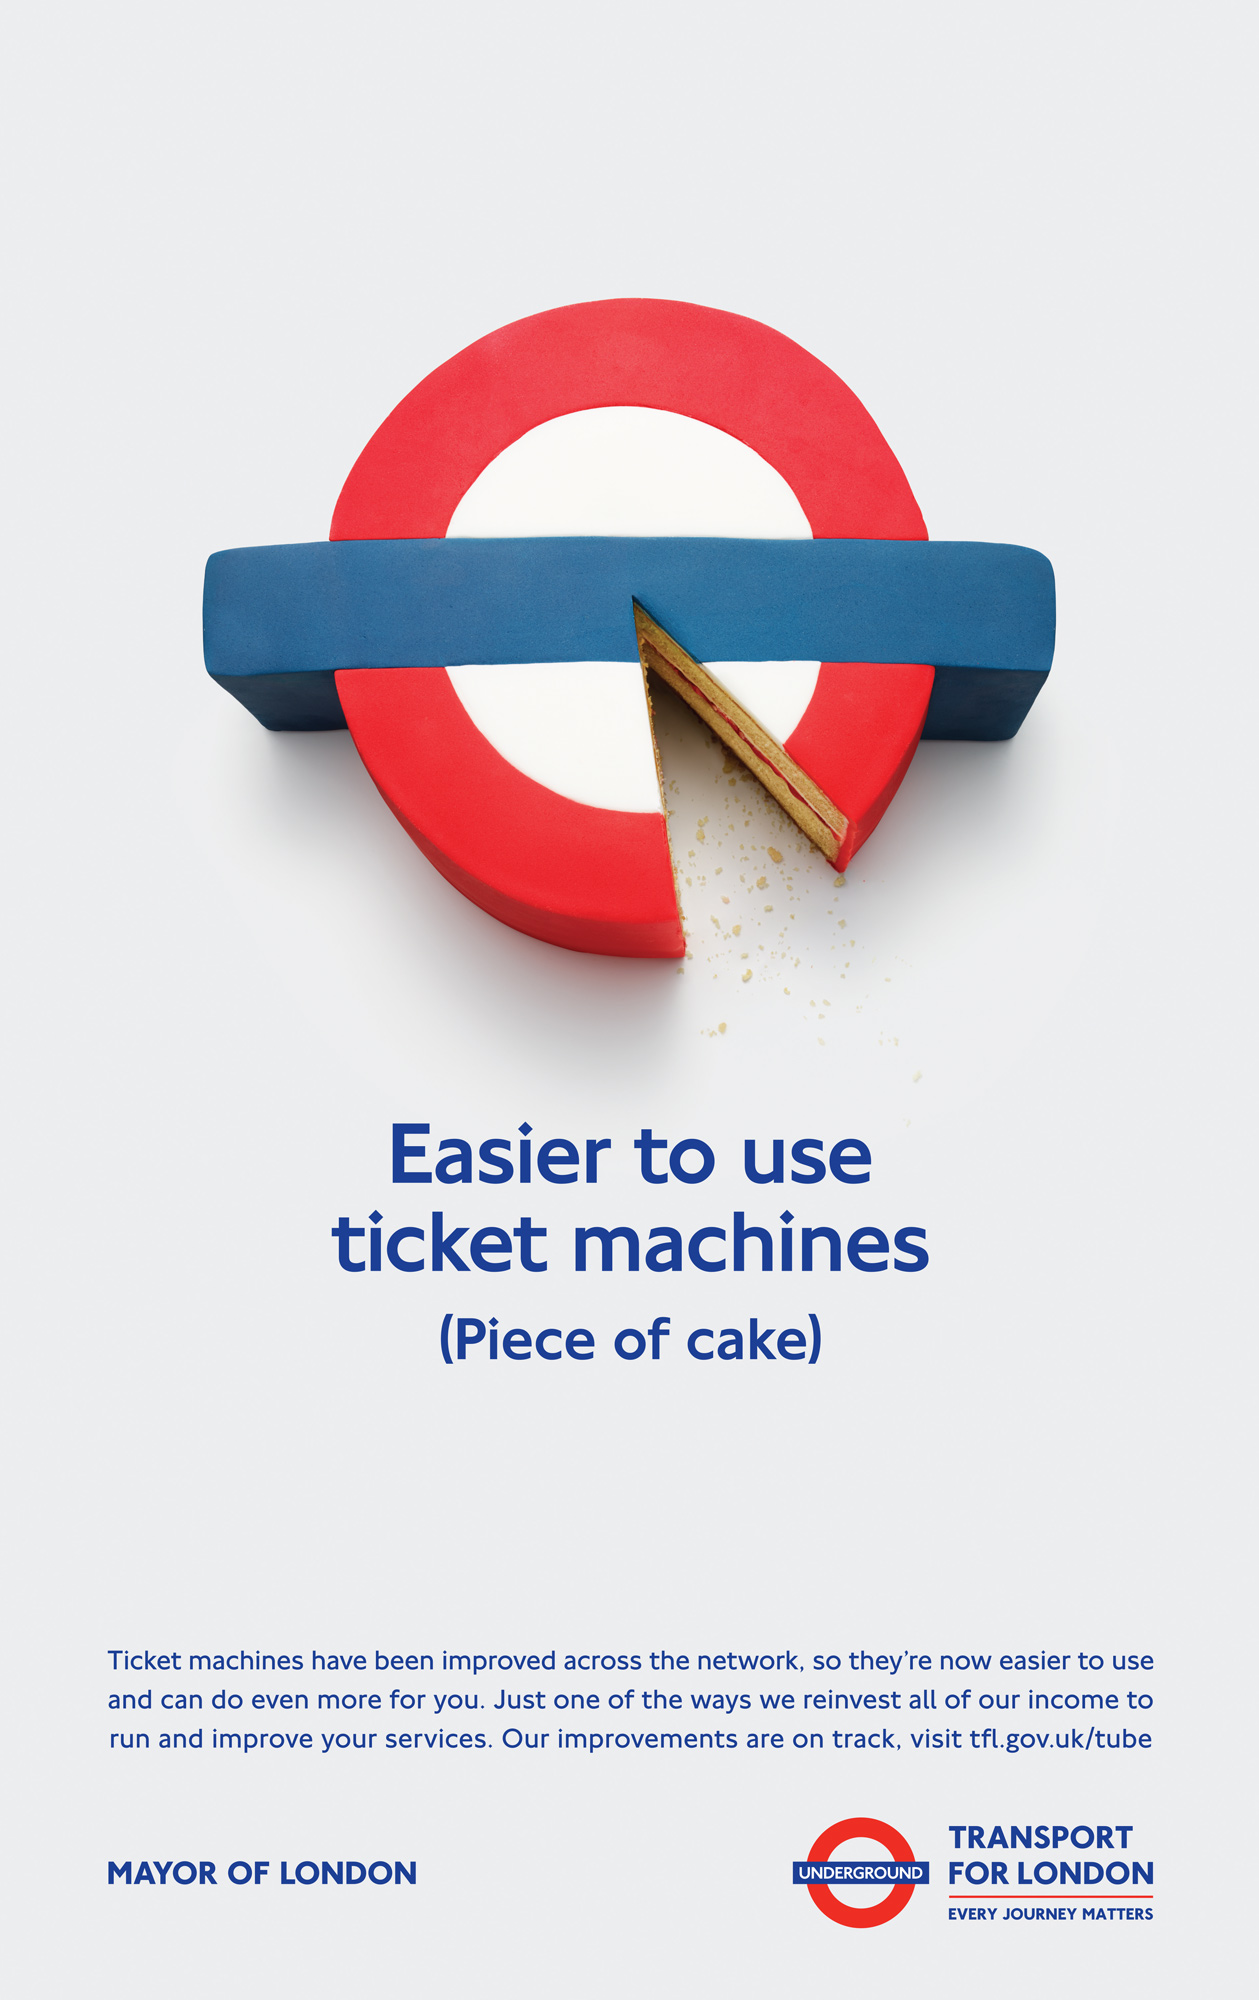 TFL cake by Alexander Kent London based still life and product photographer.